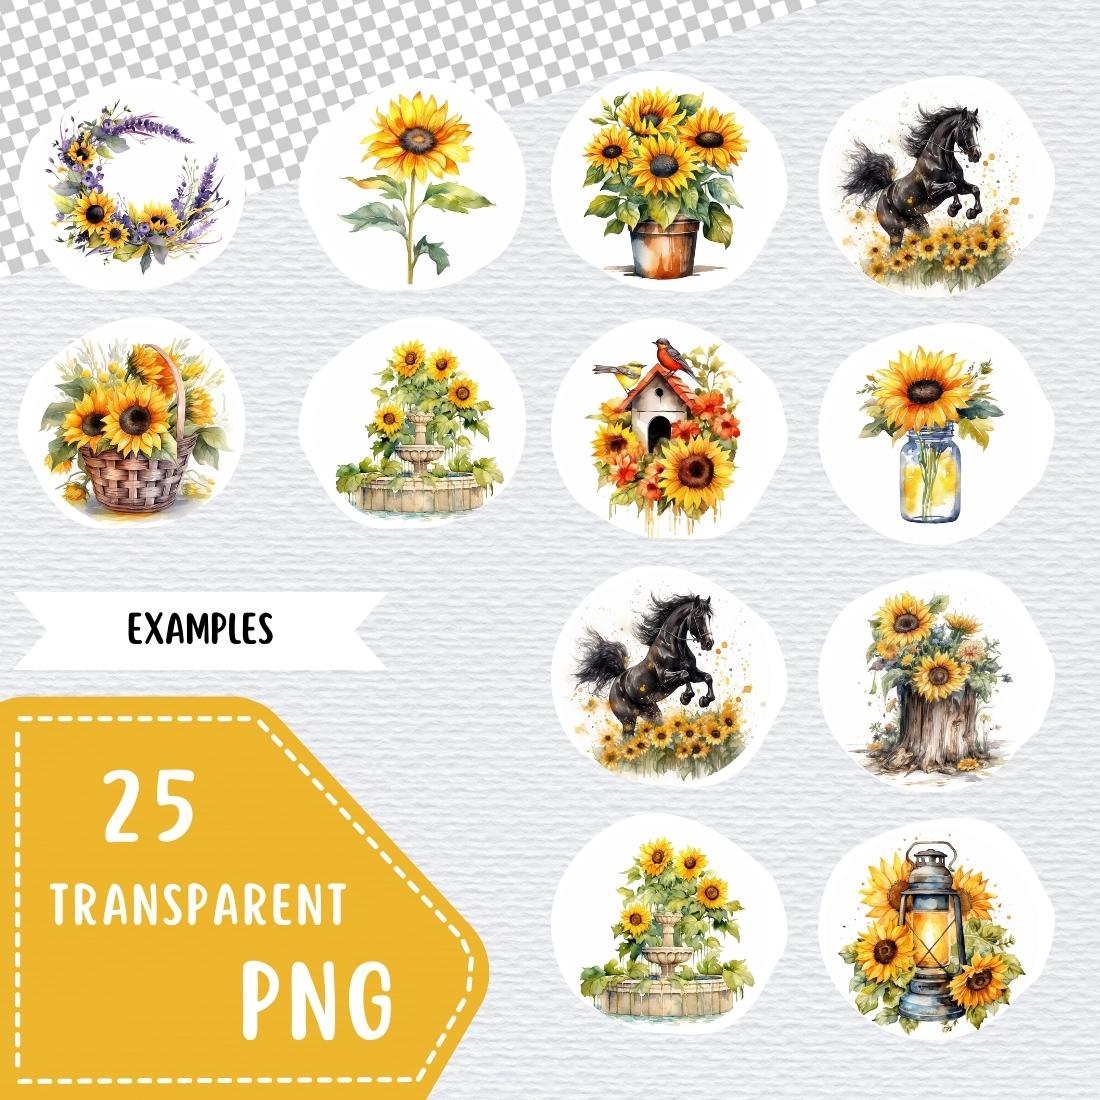 Watercolor Sunflowers PNG, Clipart, Transparent, Summer clipart, wedding clipart, Nursery Art, Hand drawn illustrations, watercolor clipart preview image.